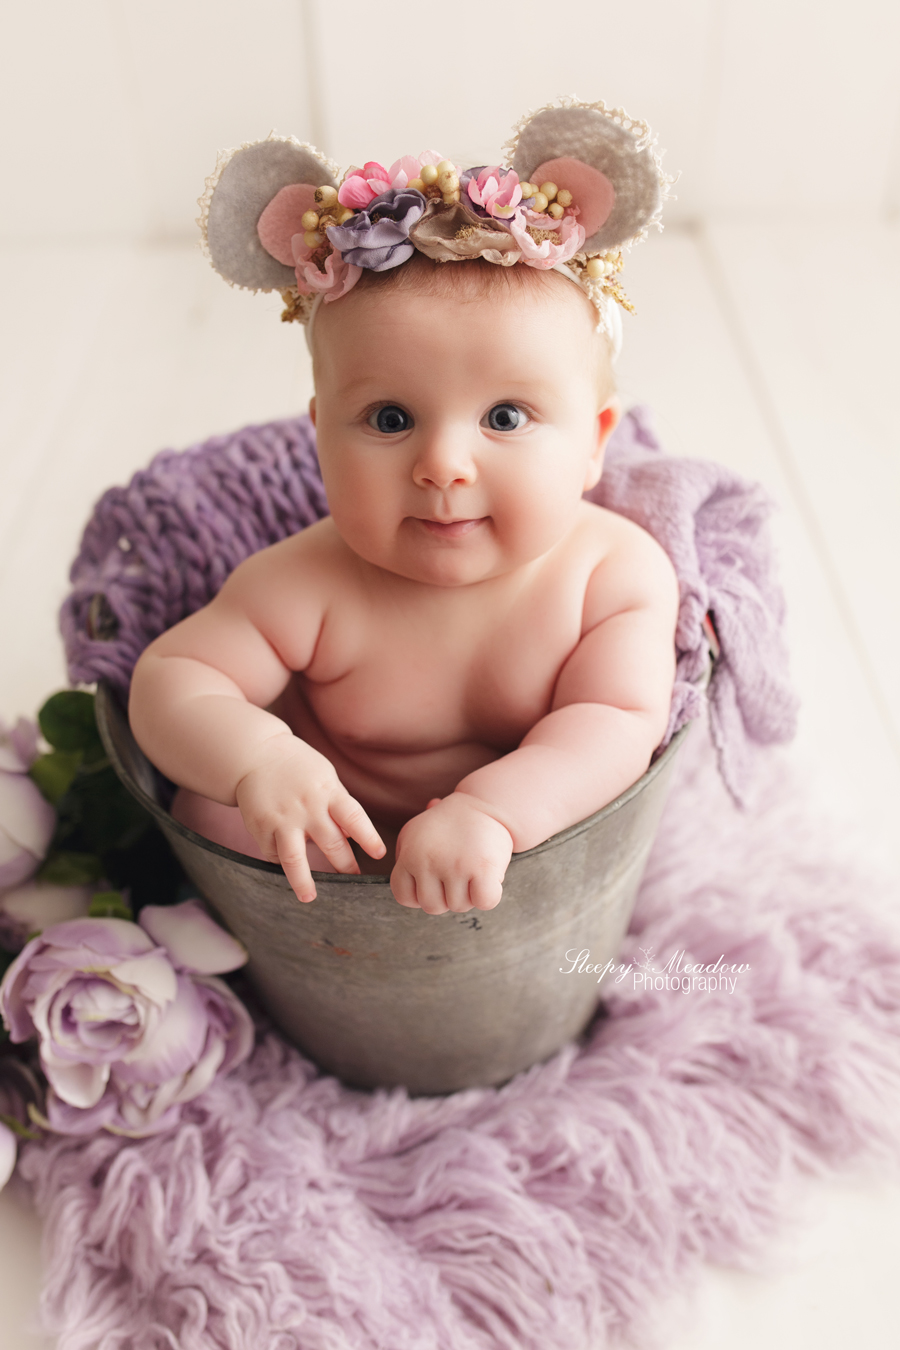 Baby poses in vintage bucket wearing an adorable mouse headband by the Dainty Miss. Pictures by Sleepy Meadow Photography of Milwaukee.